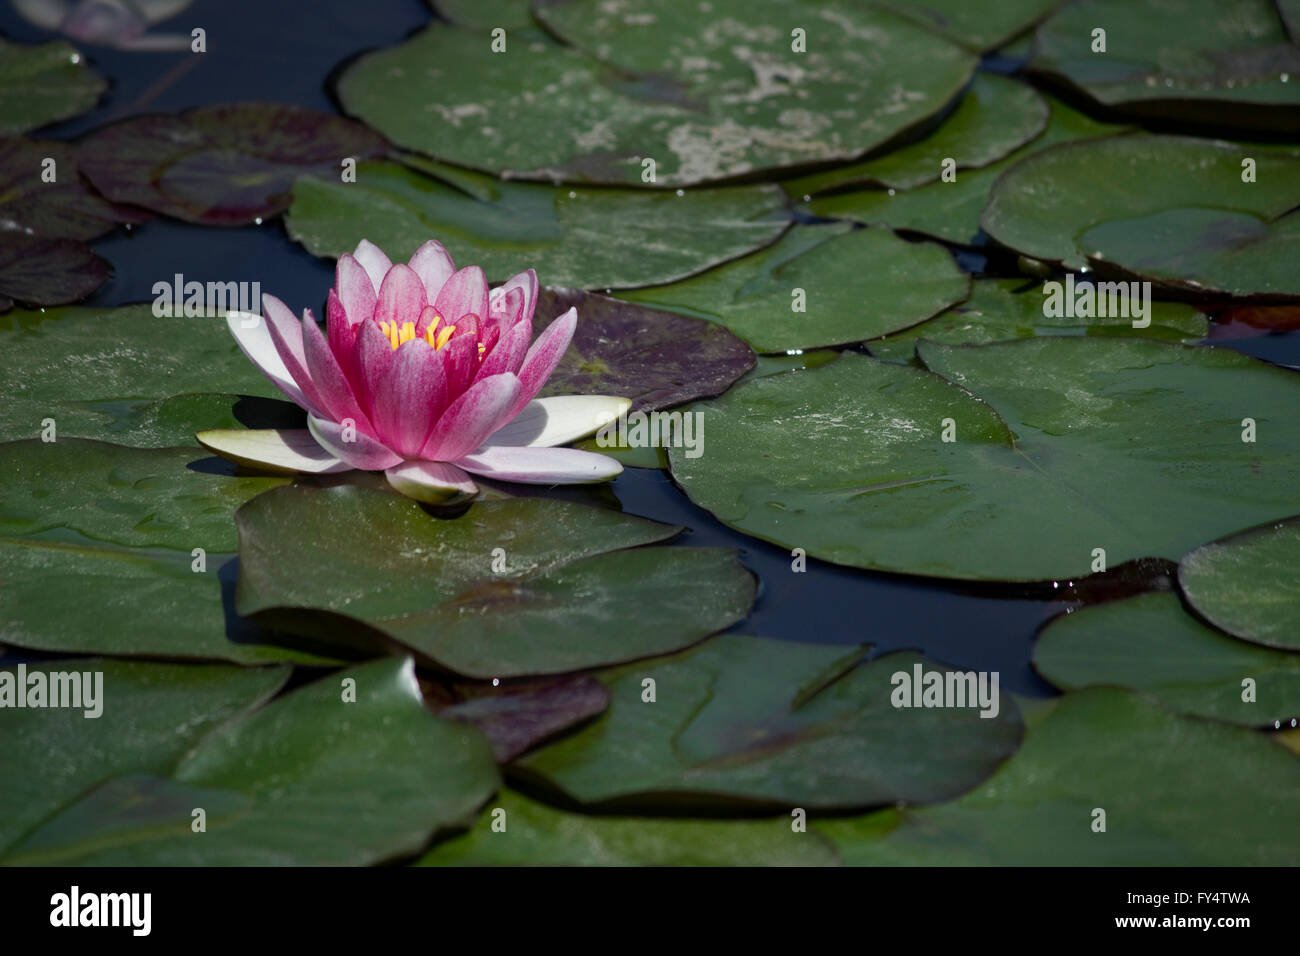 Closeup of a violet colour water lily (waterlily plant) hydrophilic herb blossom and green lily pads floating on water. Stock Photo